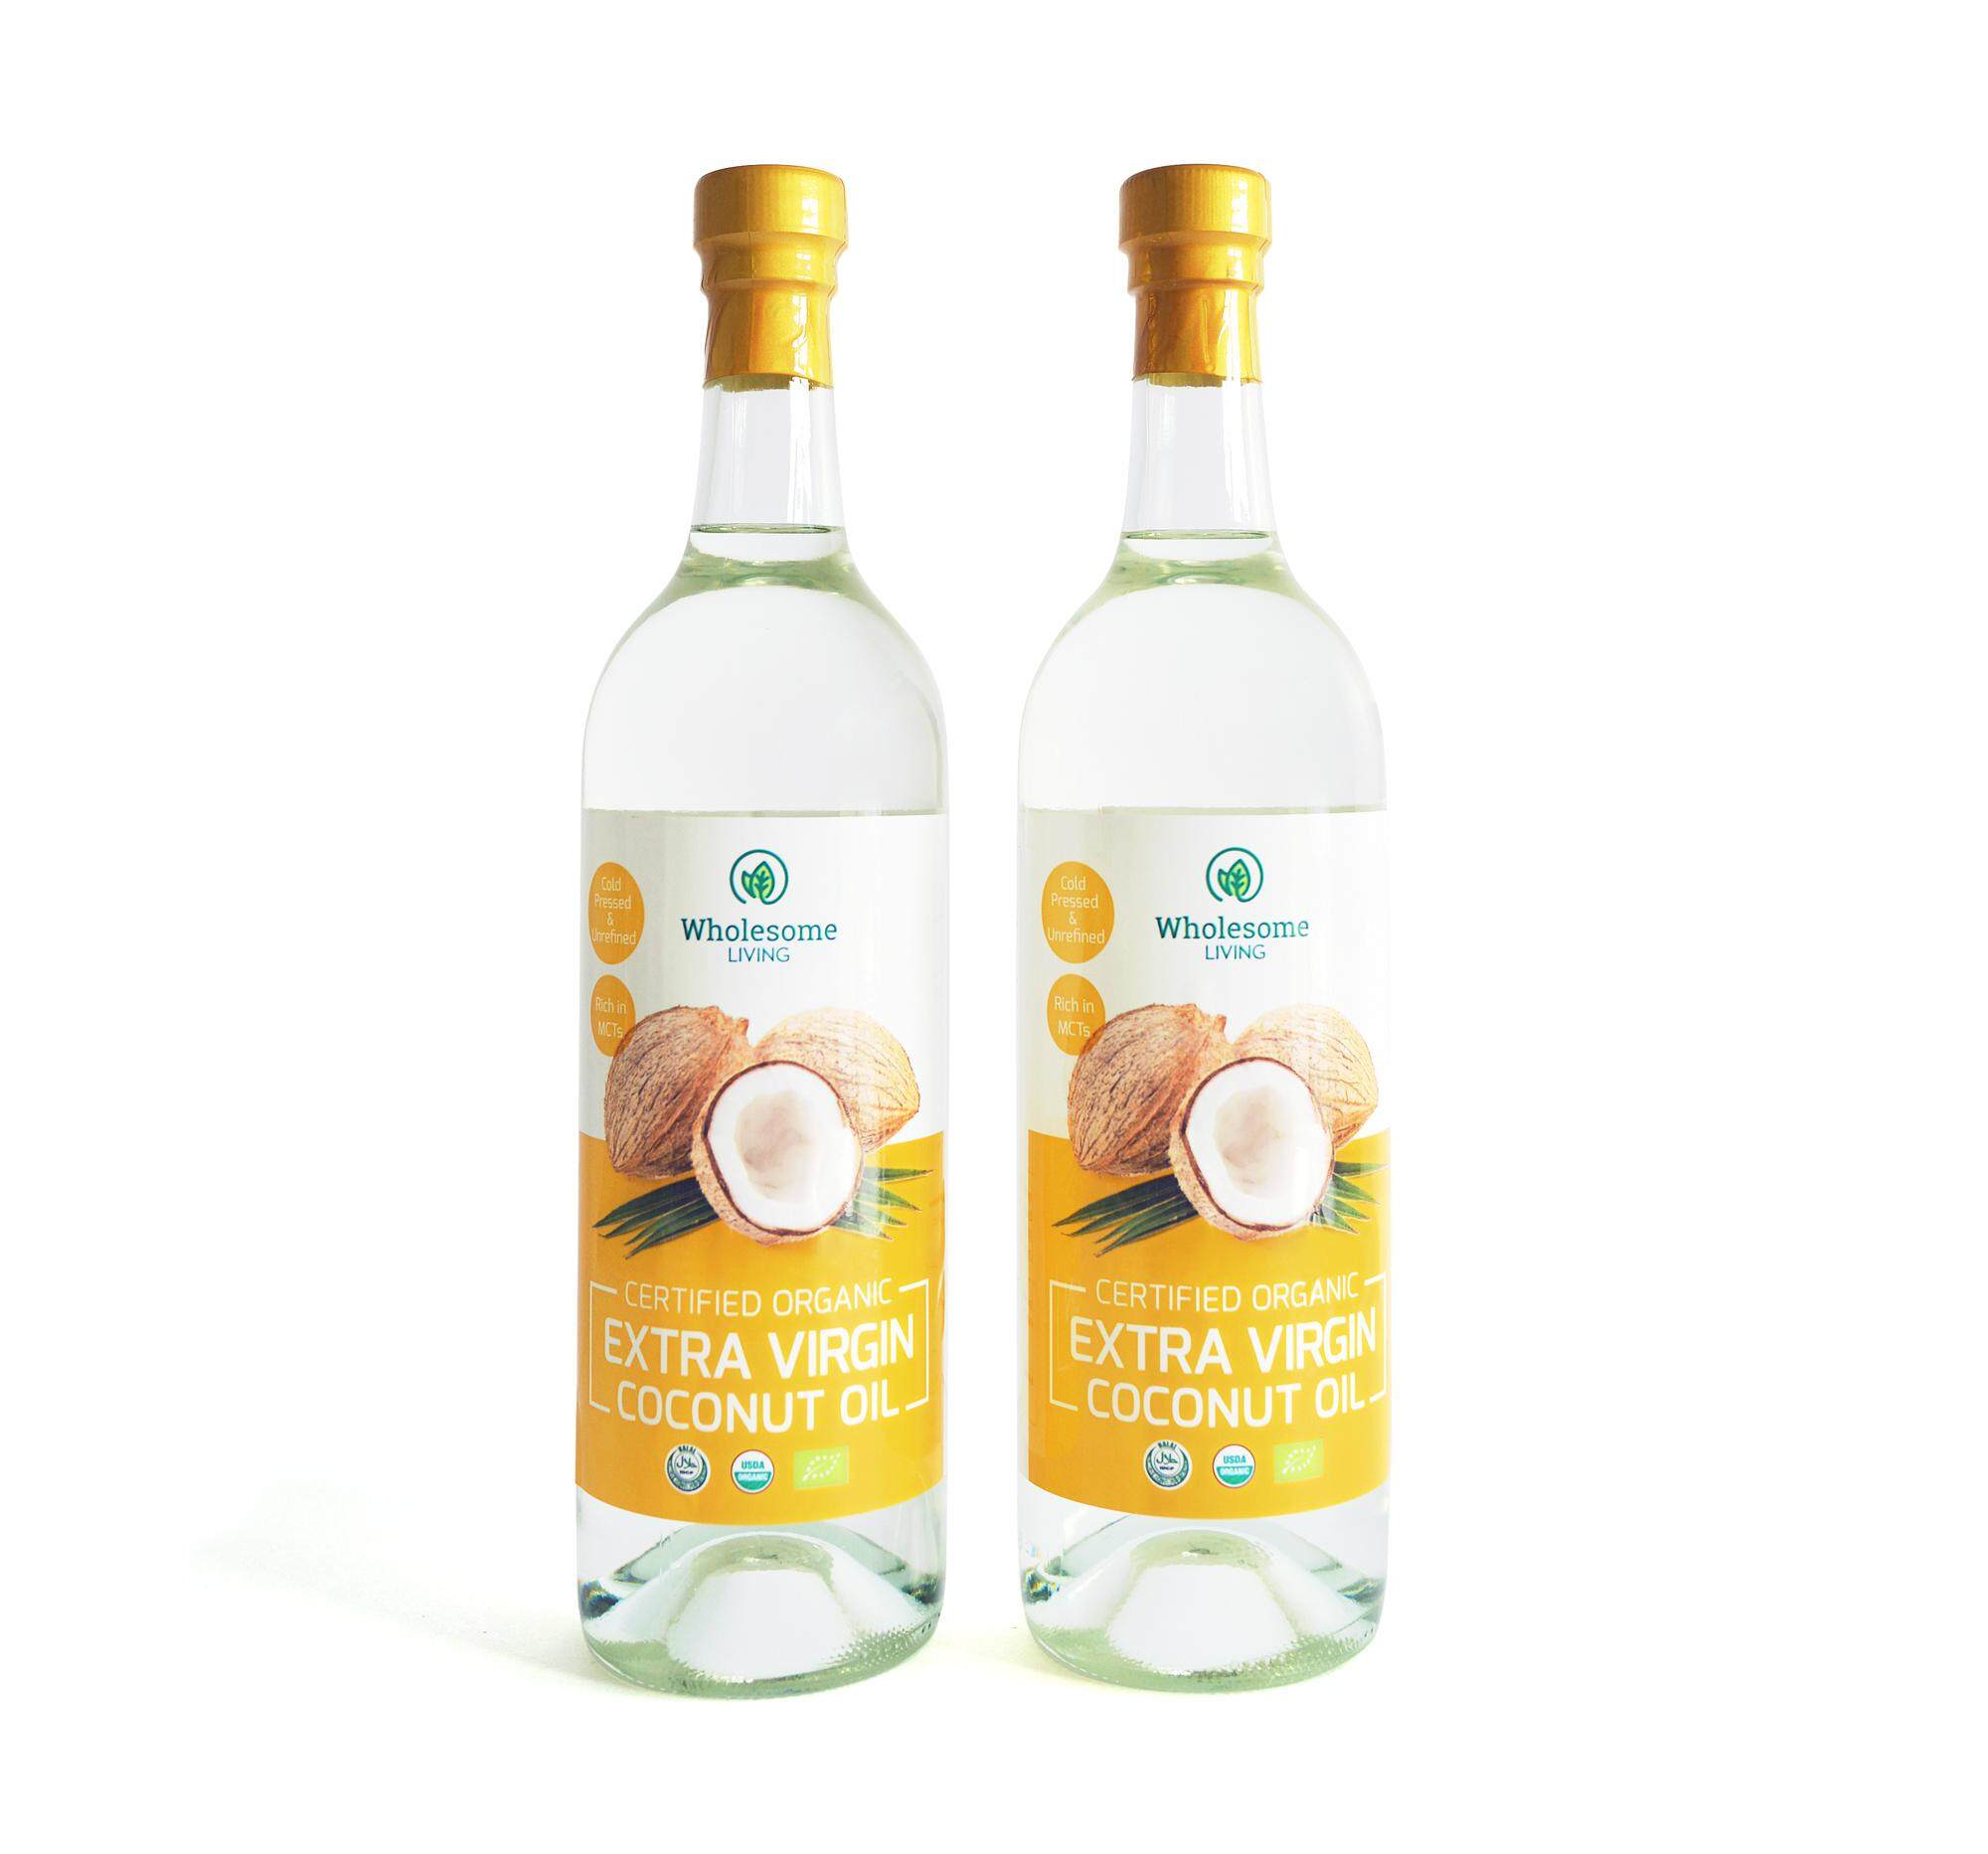 Wholesome Living Organic Extra Virgin Coconut Oil 750ml x 2